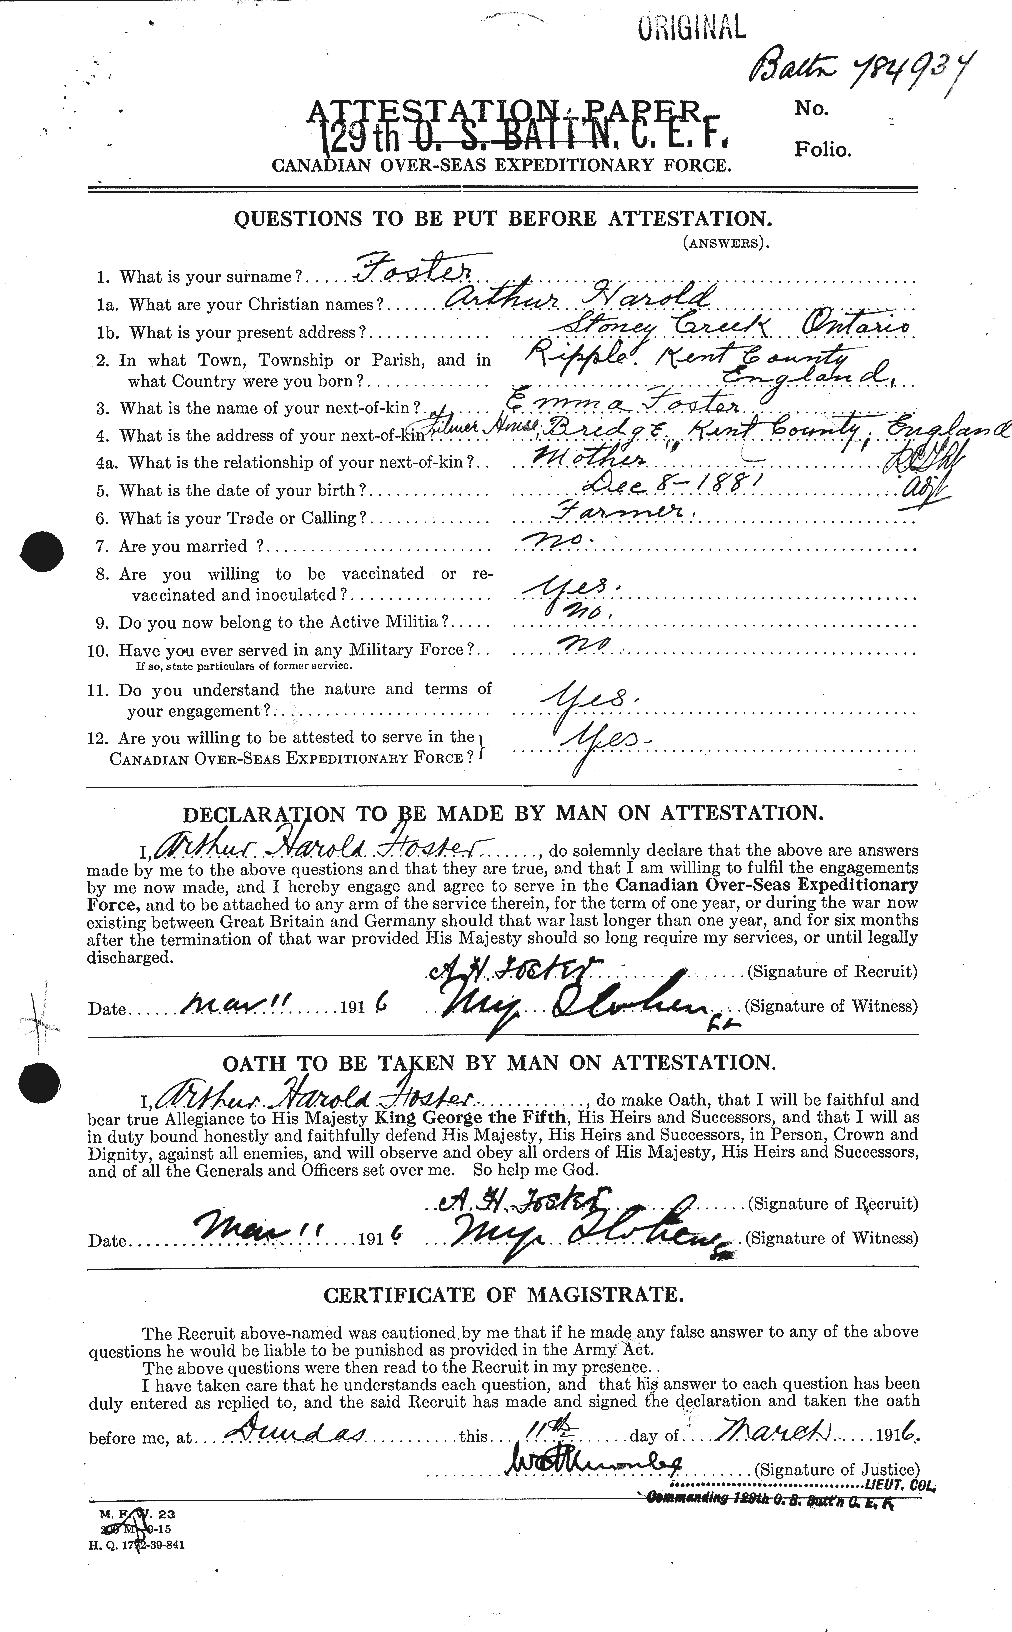 Personnel Records of the First World War - CEF 330473a